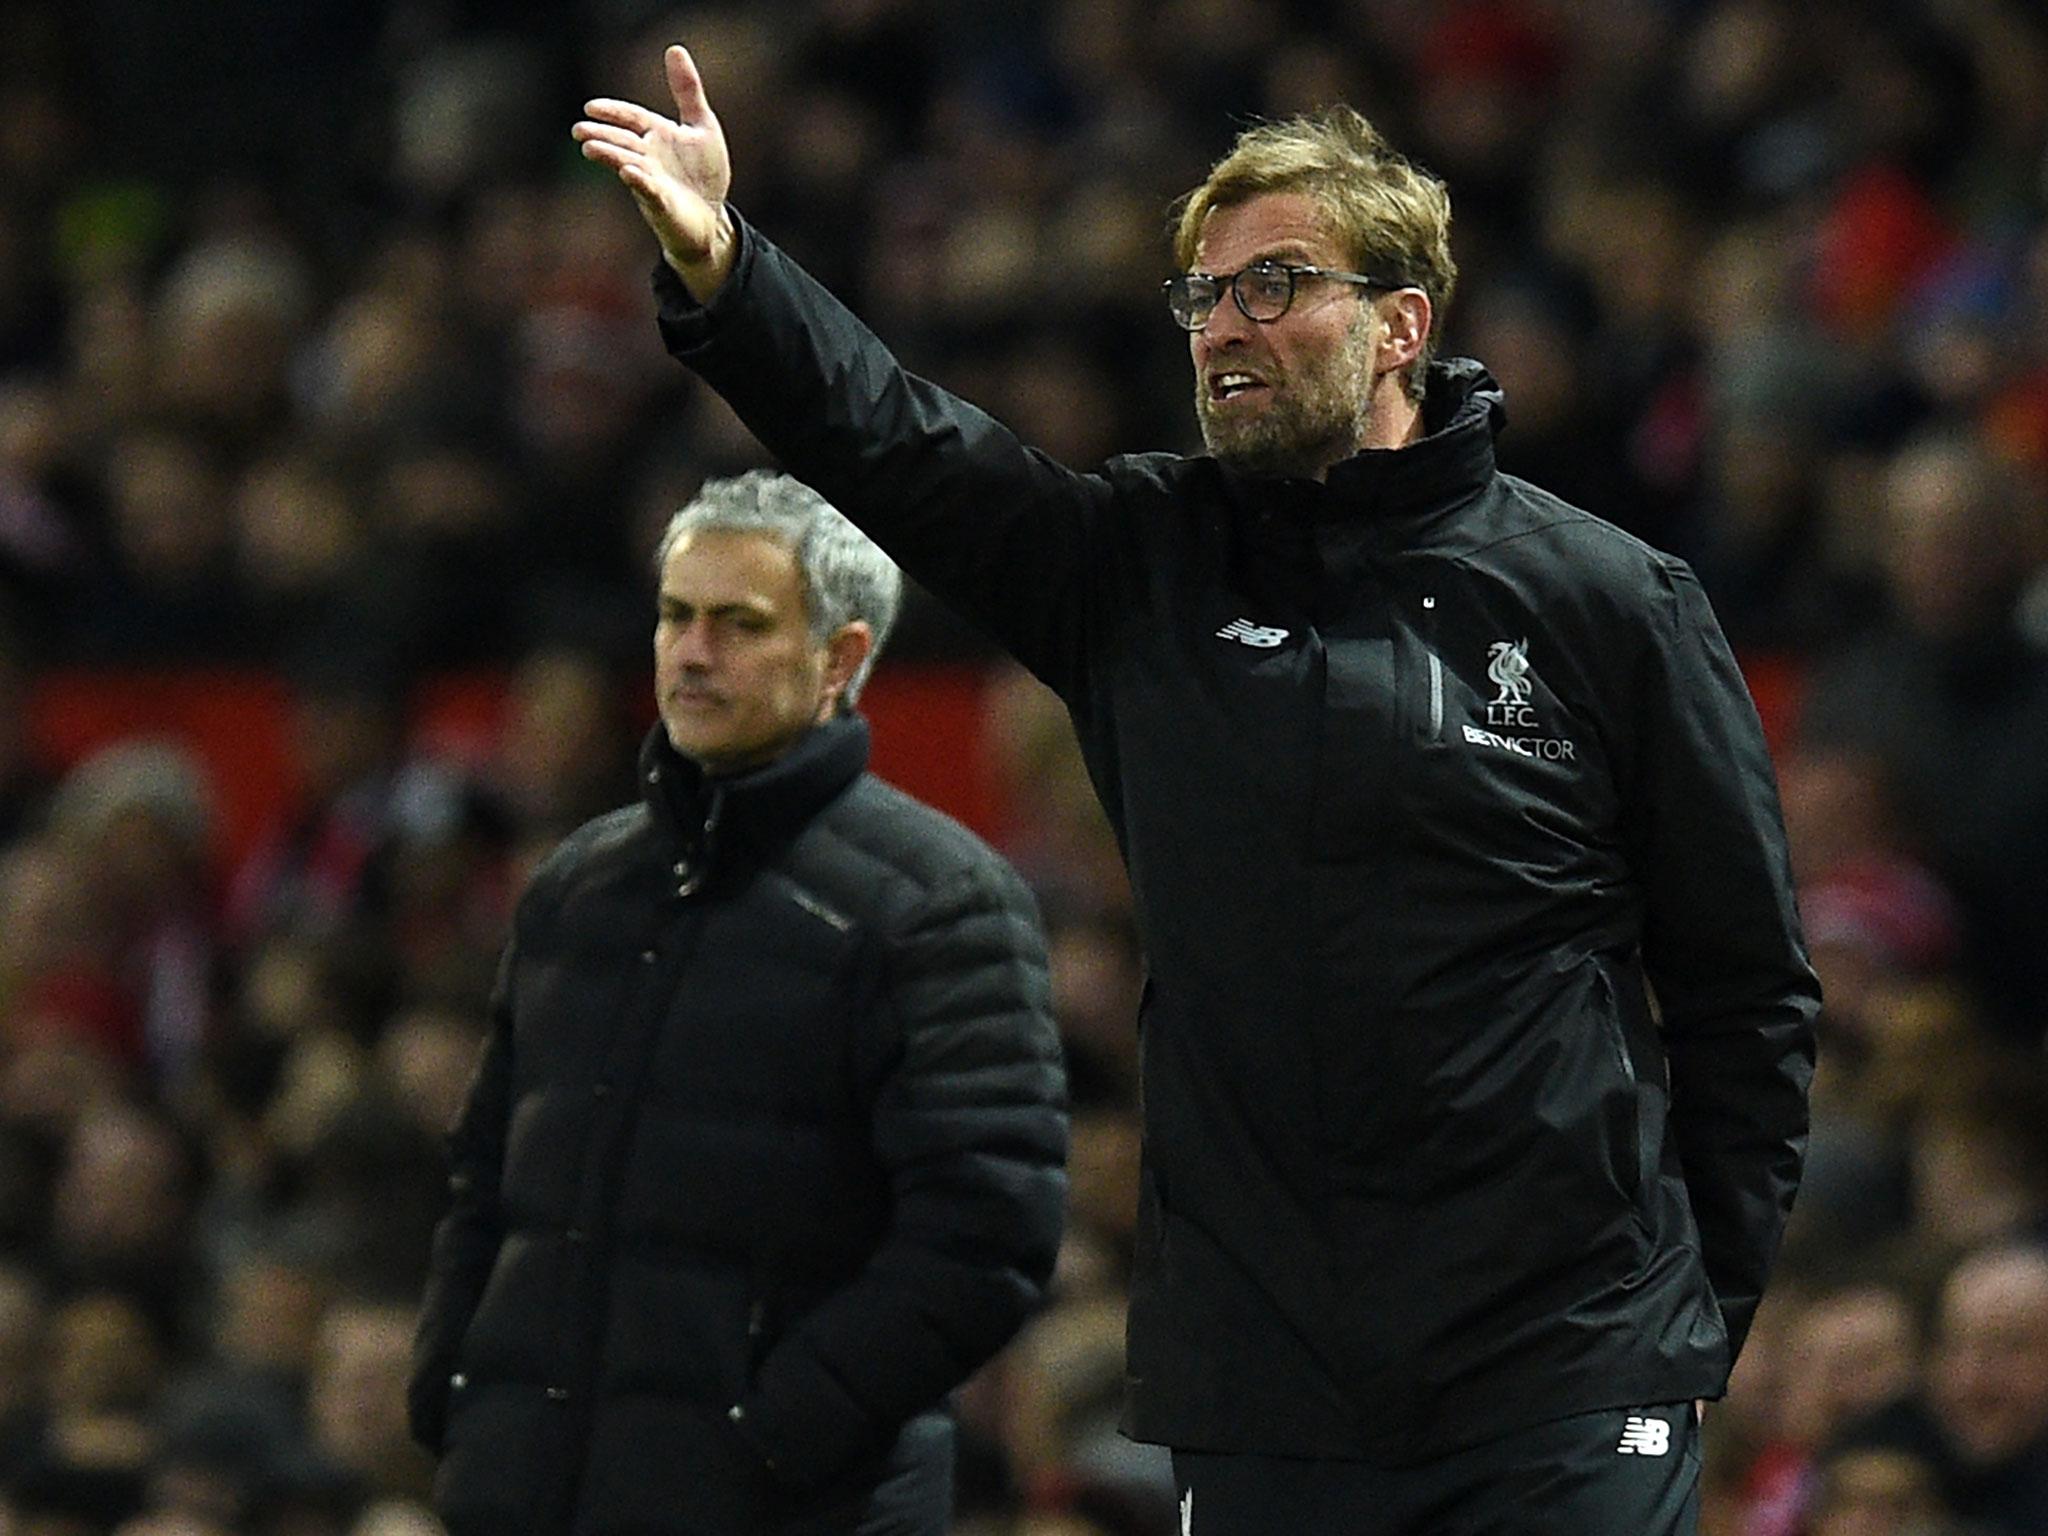 Jurgen Klopp refused to rise to Jose Mourinho's comments about Liverpool